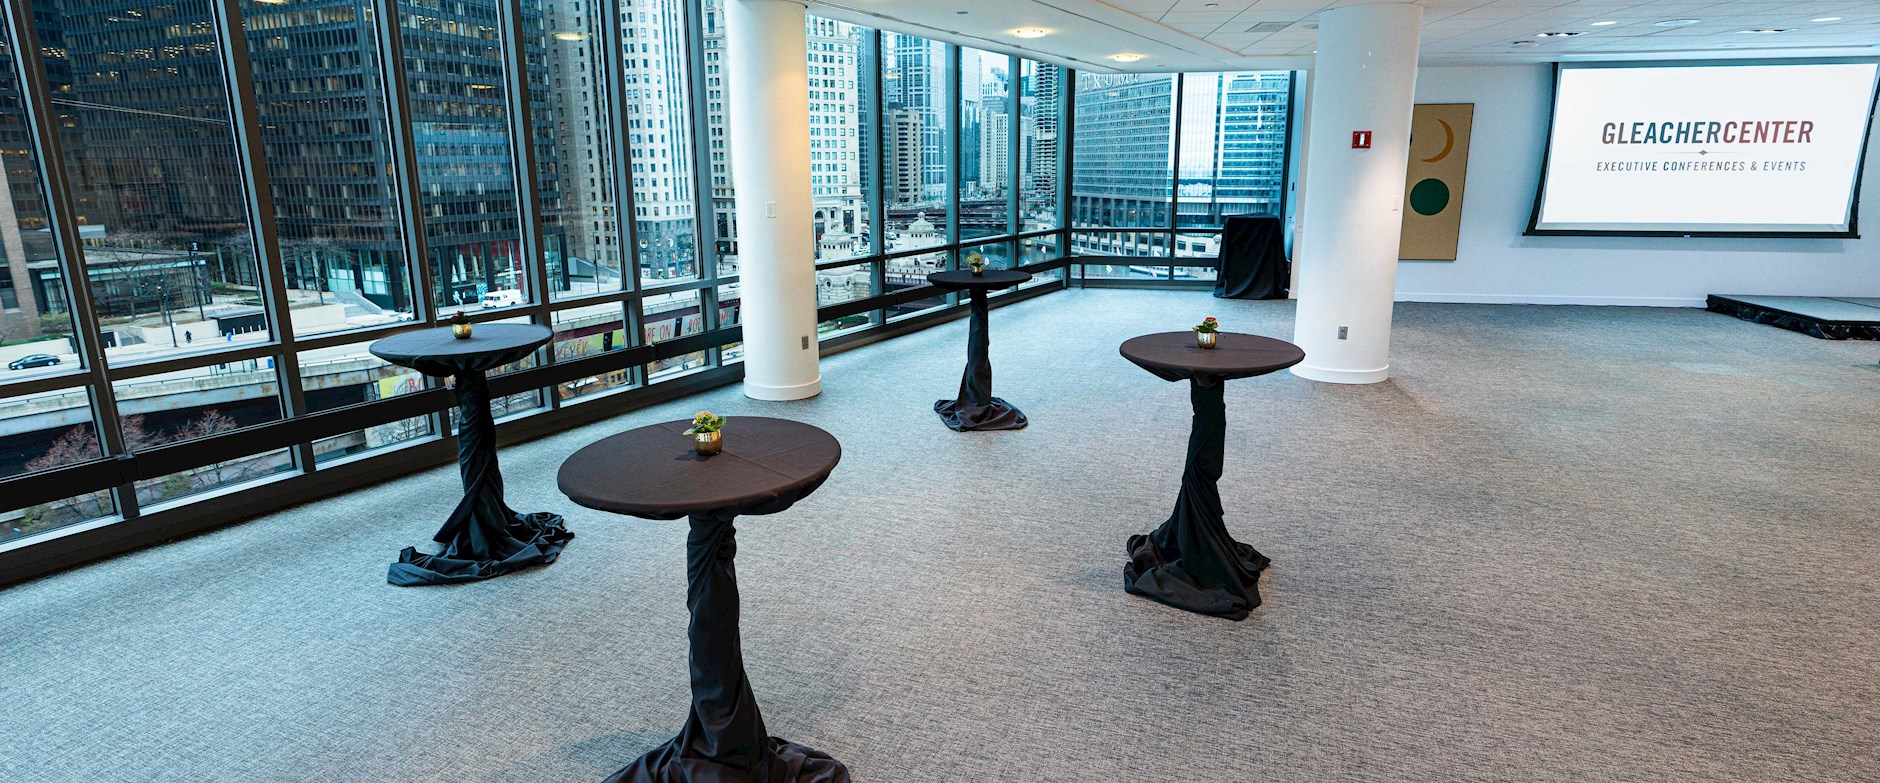 Gleacher Center conference area and cocktail tables overlooking the Chicago River